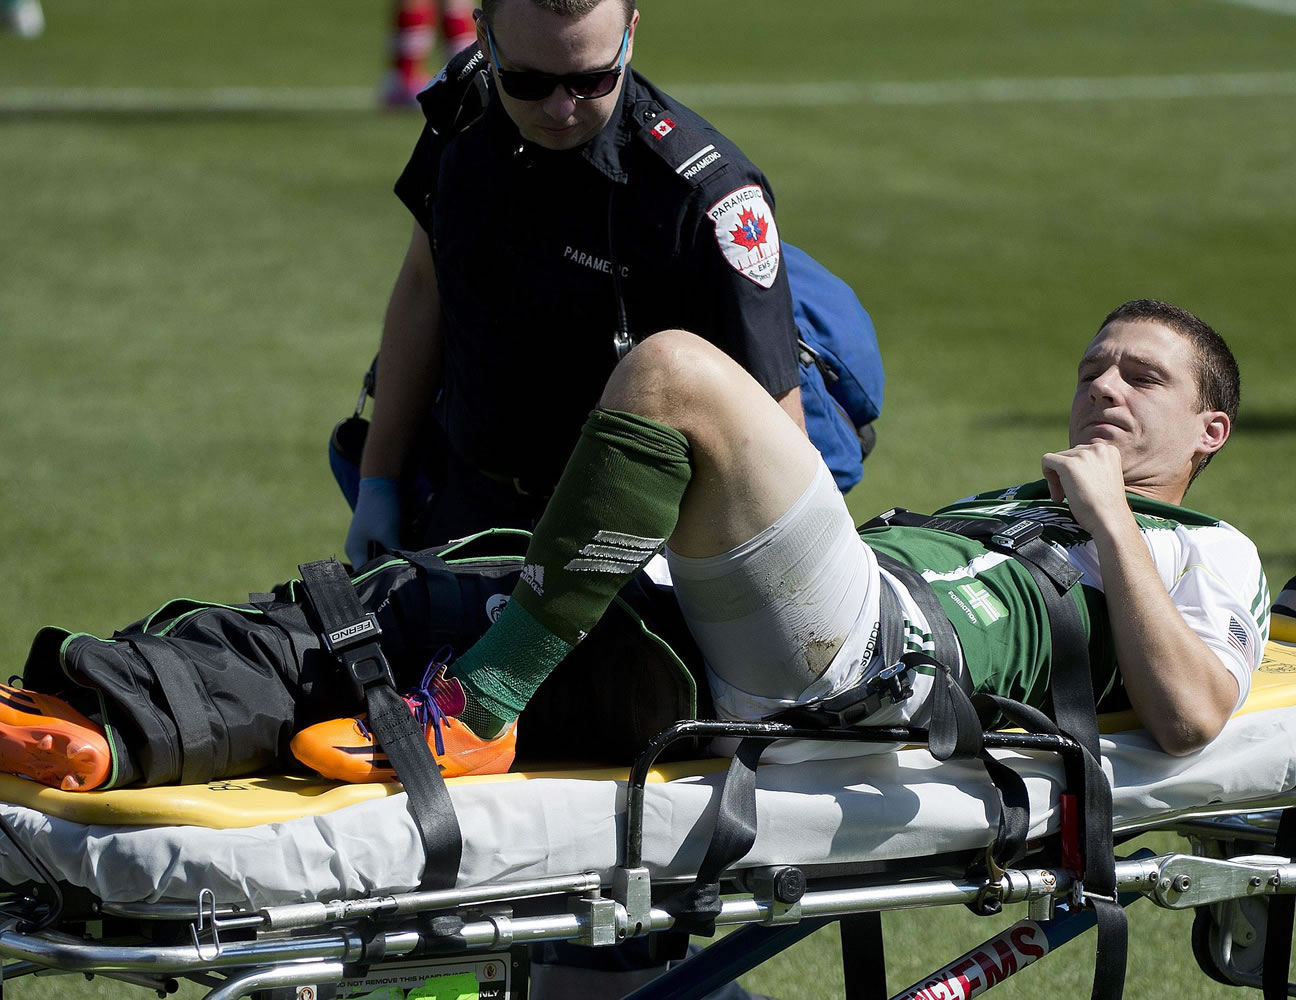 Portland Timbers midfielder Will Johnson is carted off the field on a stretcher after getting injured in the first half  against Toronto FC on Sept. 27, 2014.